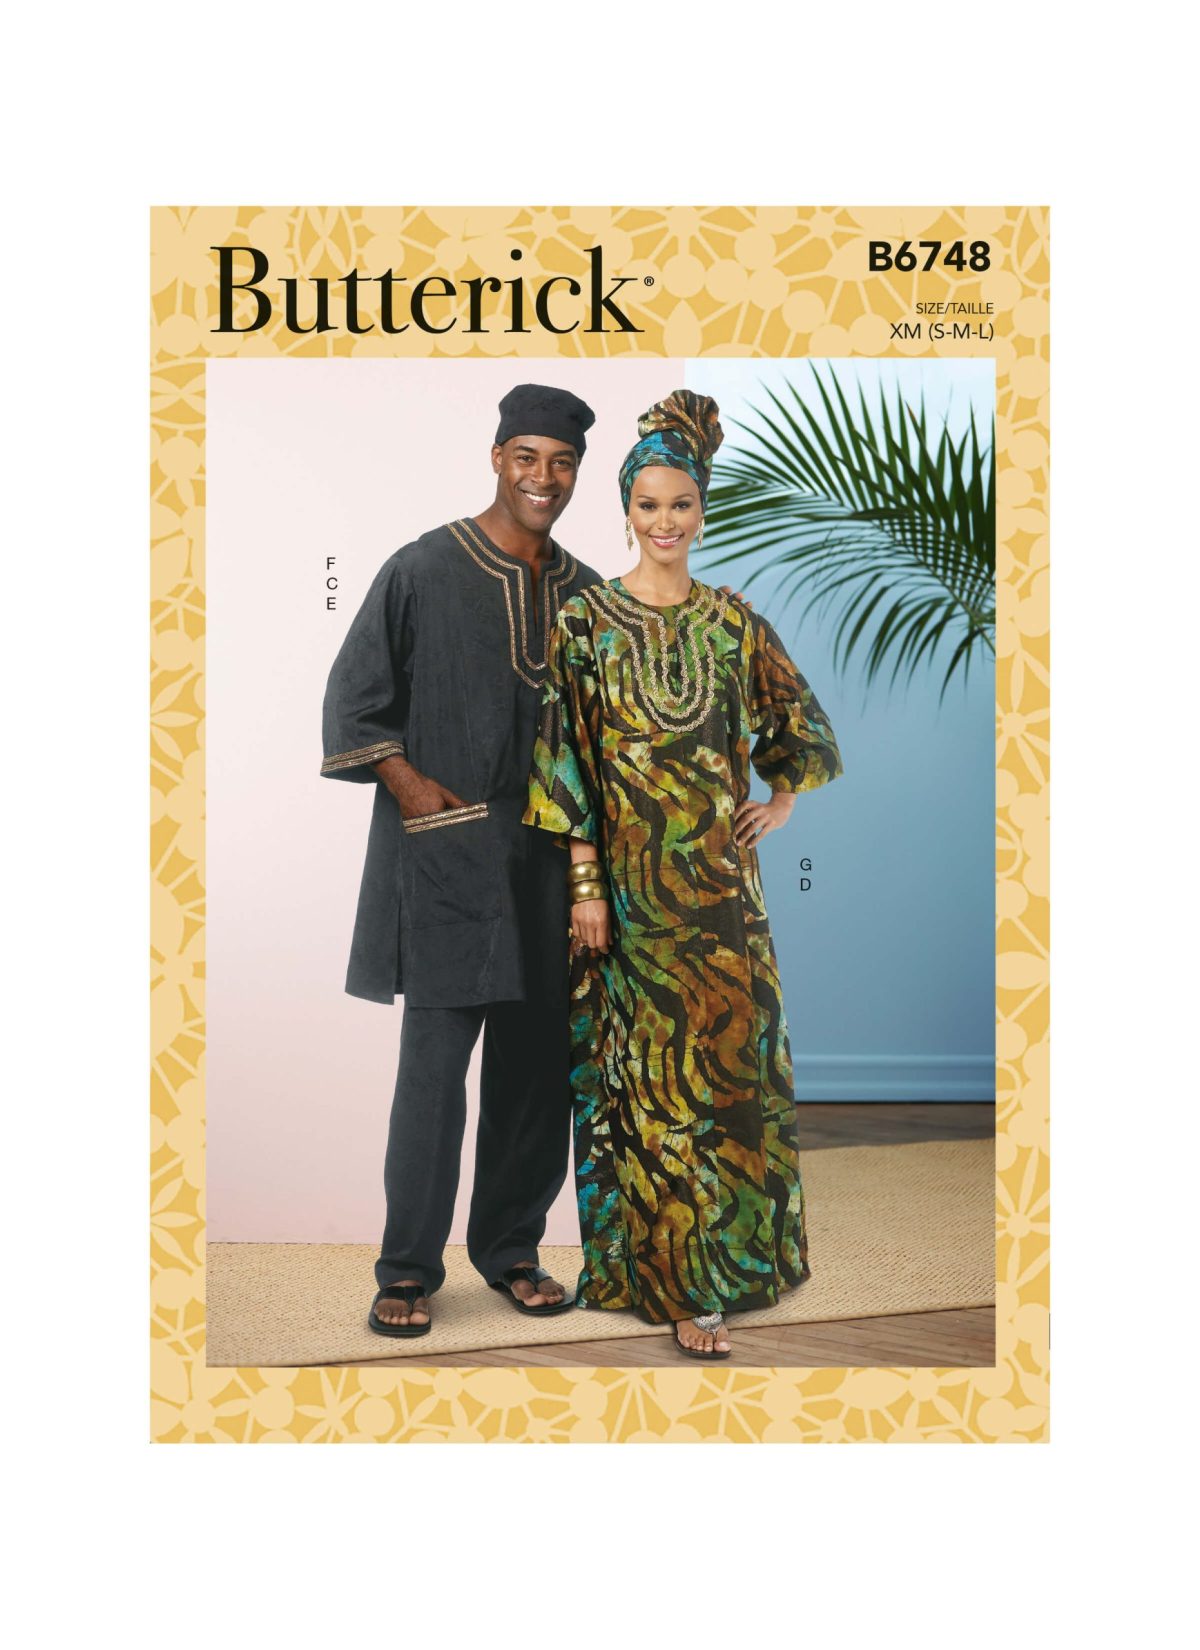 Butterick Sewing Pattern B6748 Misses'/Men's Tunic, Caftan, Trousers, Hat and Head Wrap